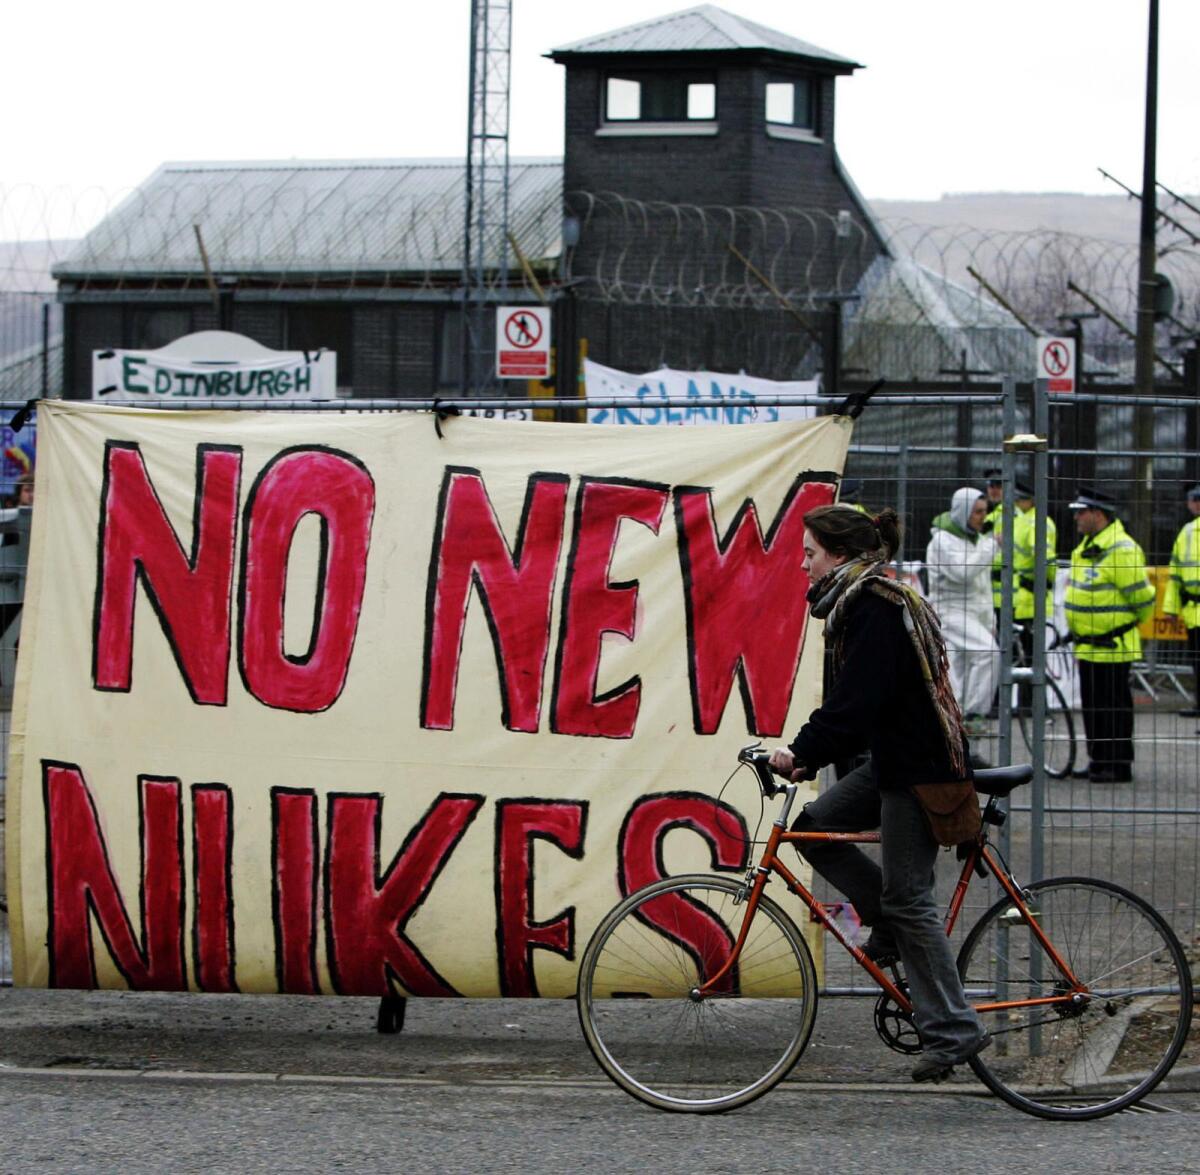 A ban-the-bomb protest in Scotland, 2007. A Los Alamos research says he was fired for calling for an end to nuclear weapons.